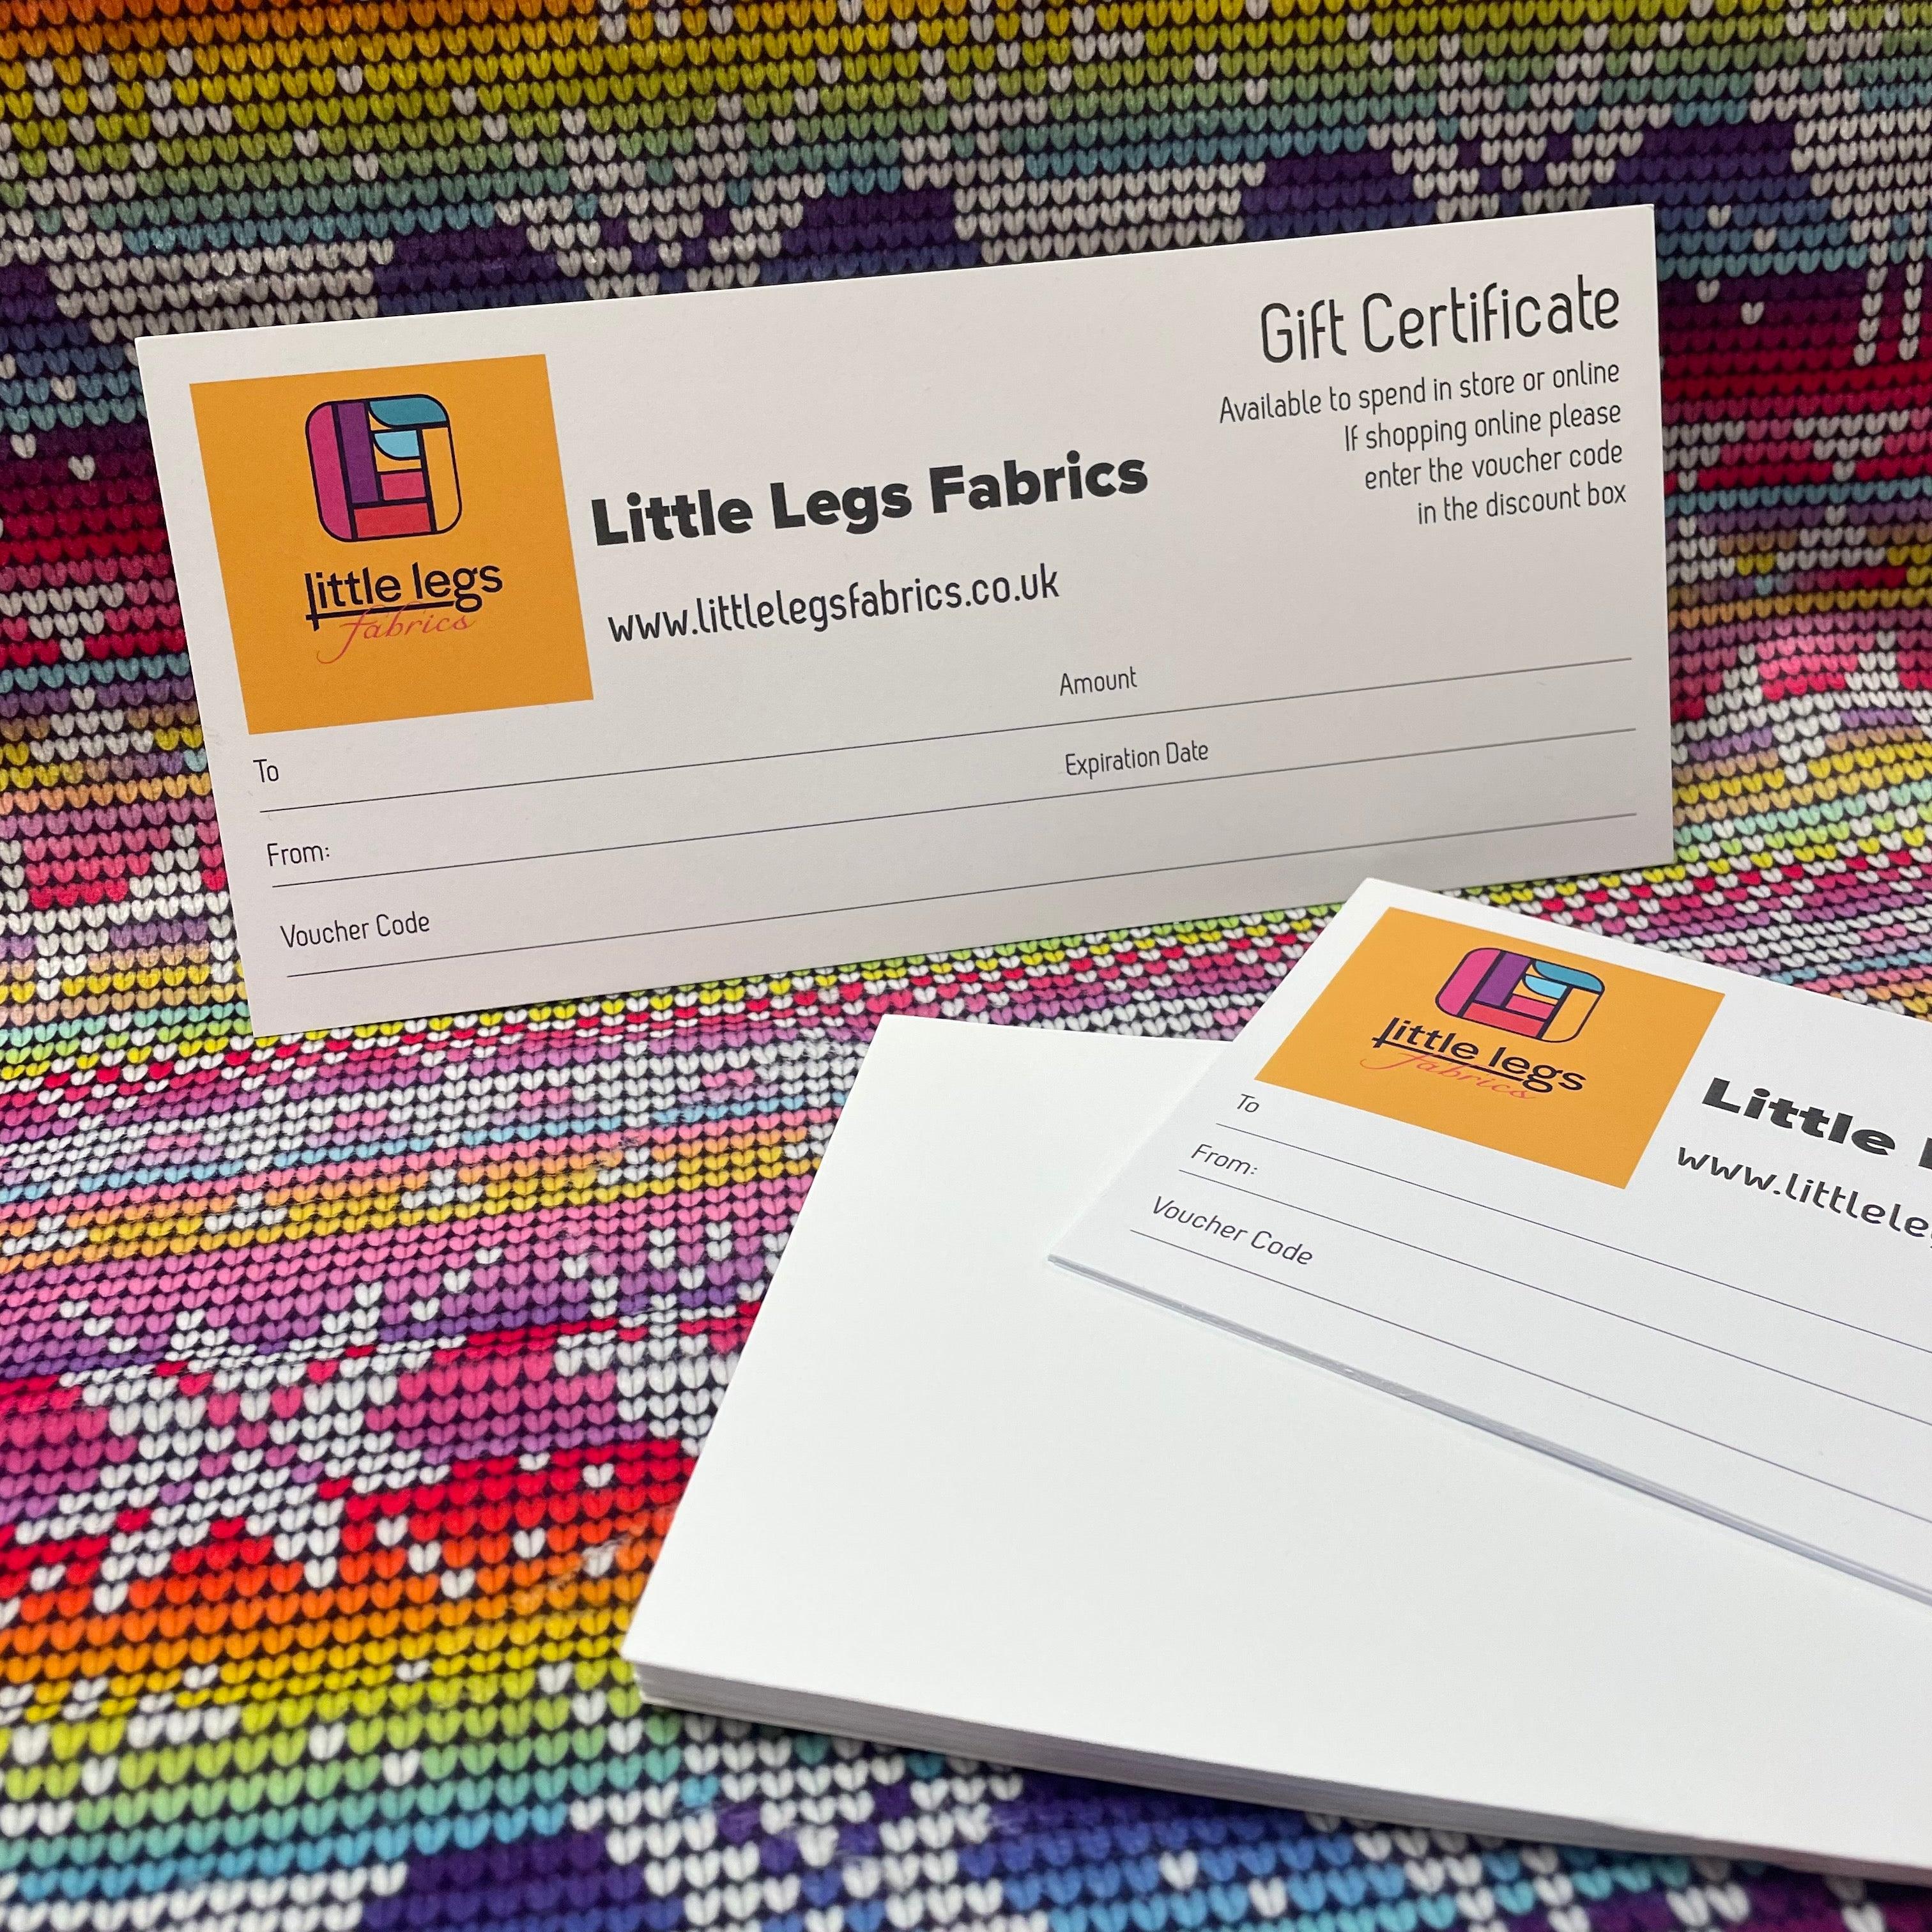 Gift Certificate Card and Envelope